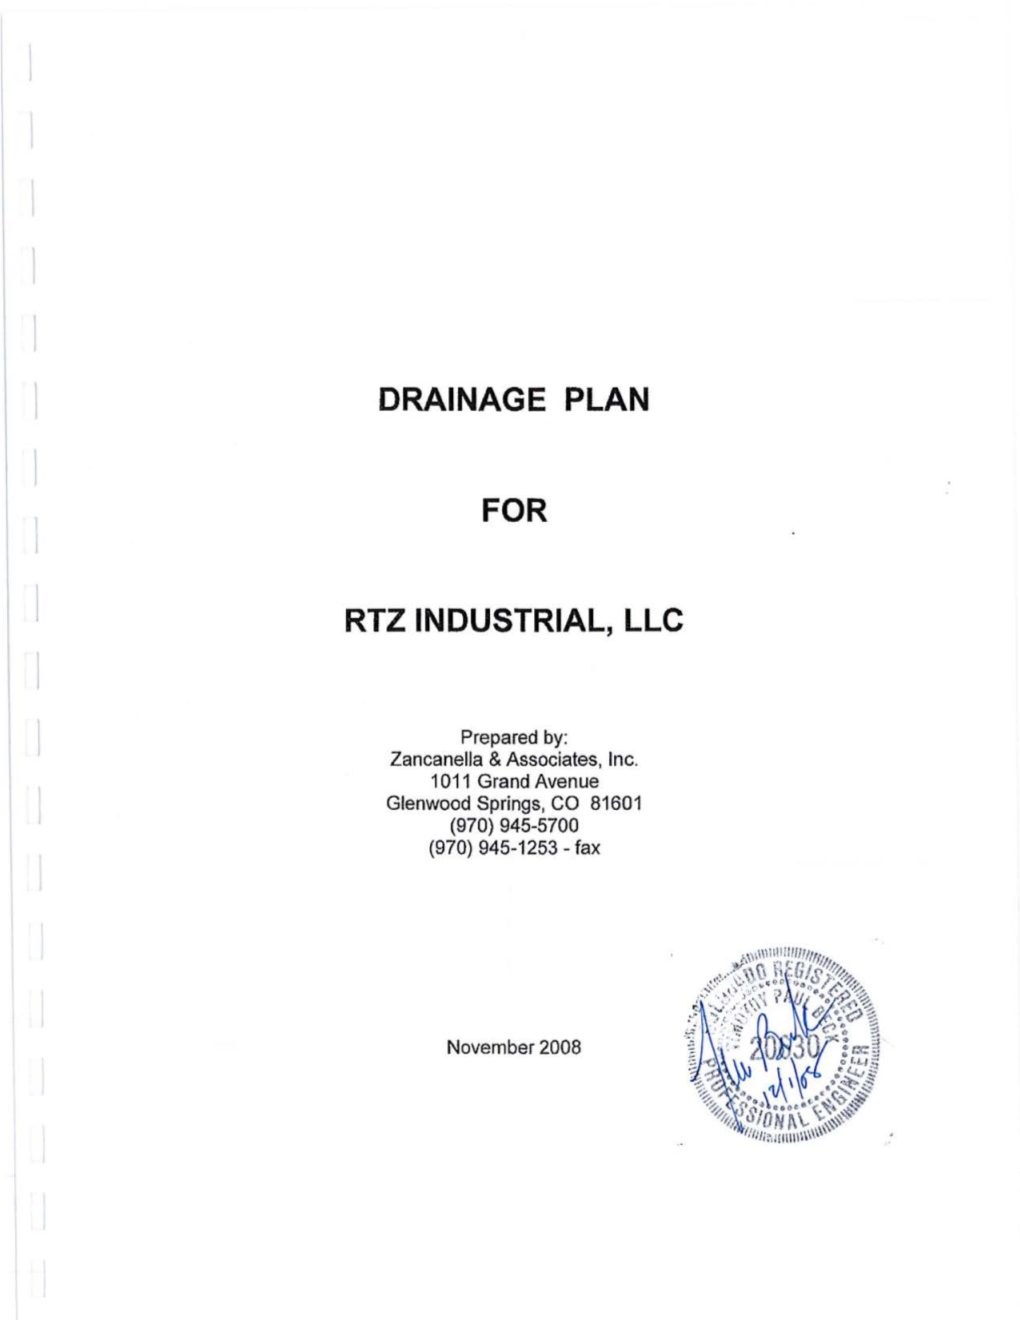 Drainage Plan for Rtz Industrial